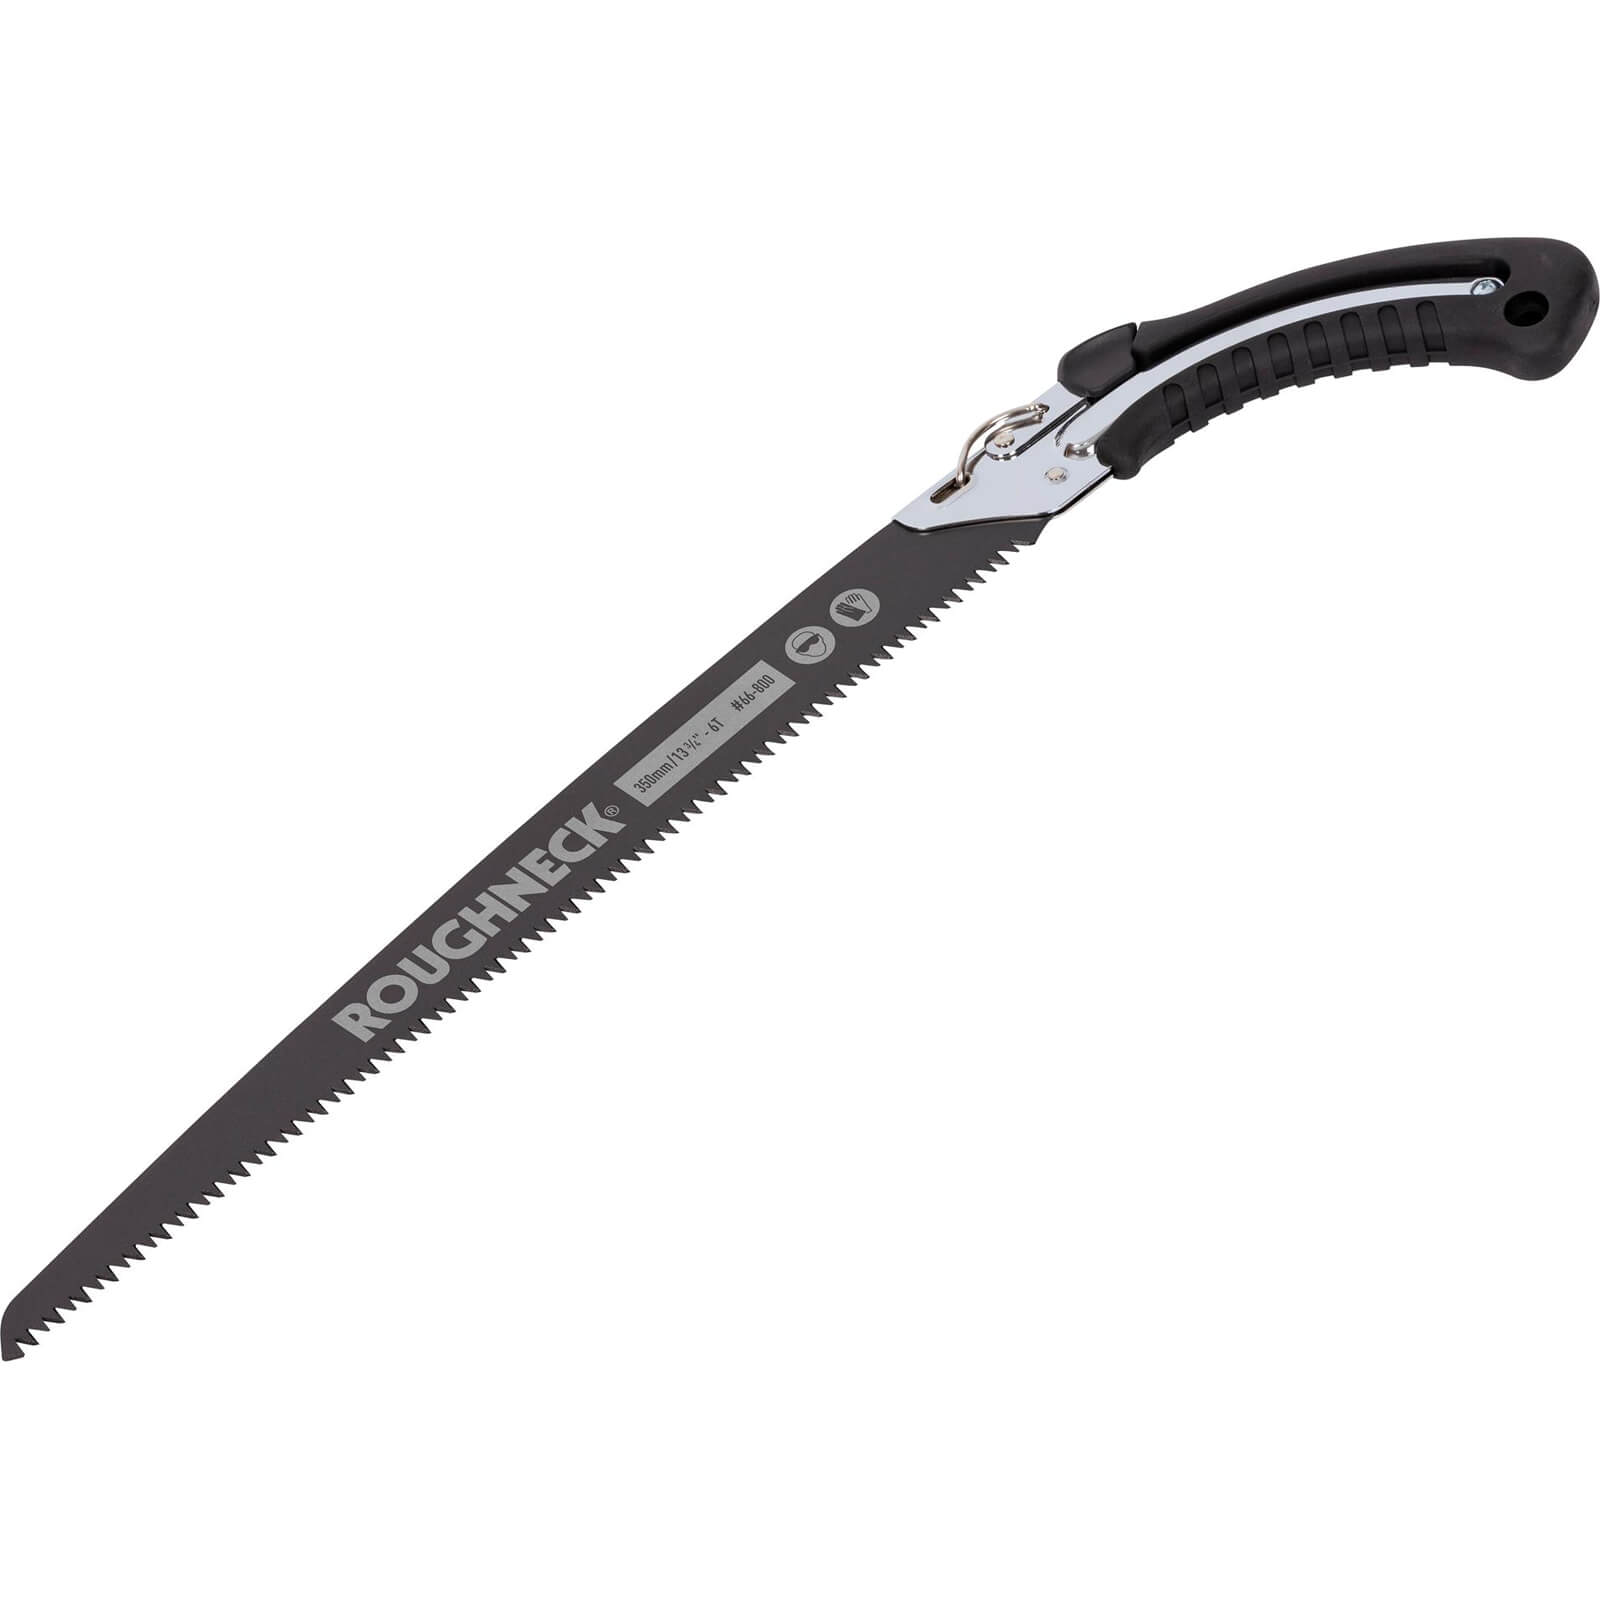 Image of Roughneck Gorilla 66800 Fast Cut Pruning Saw 350mm